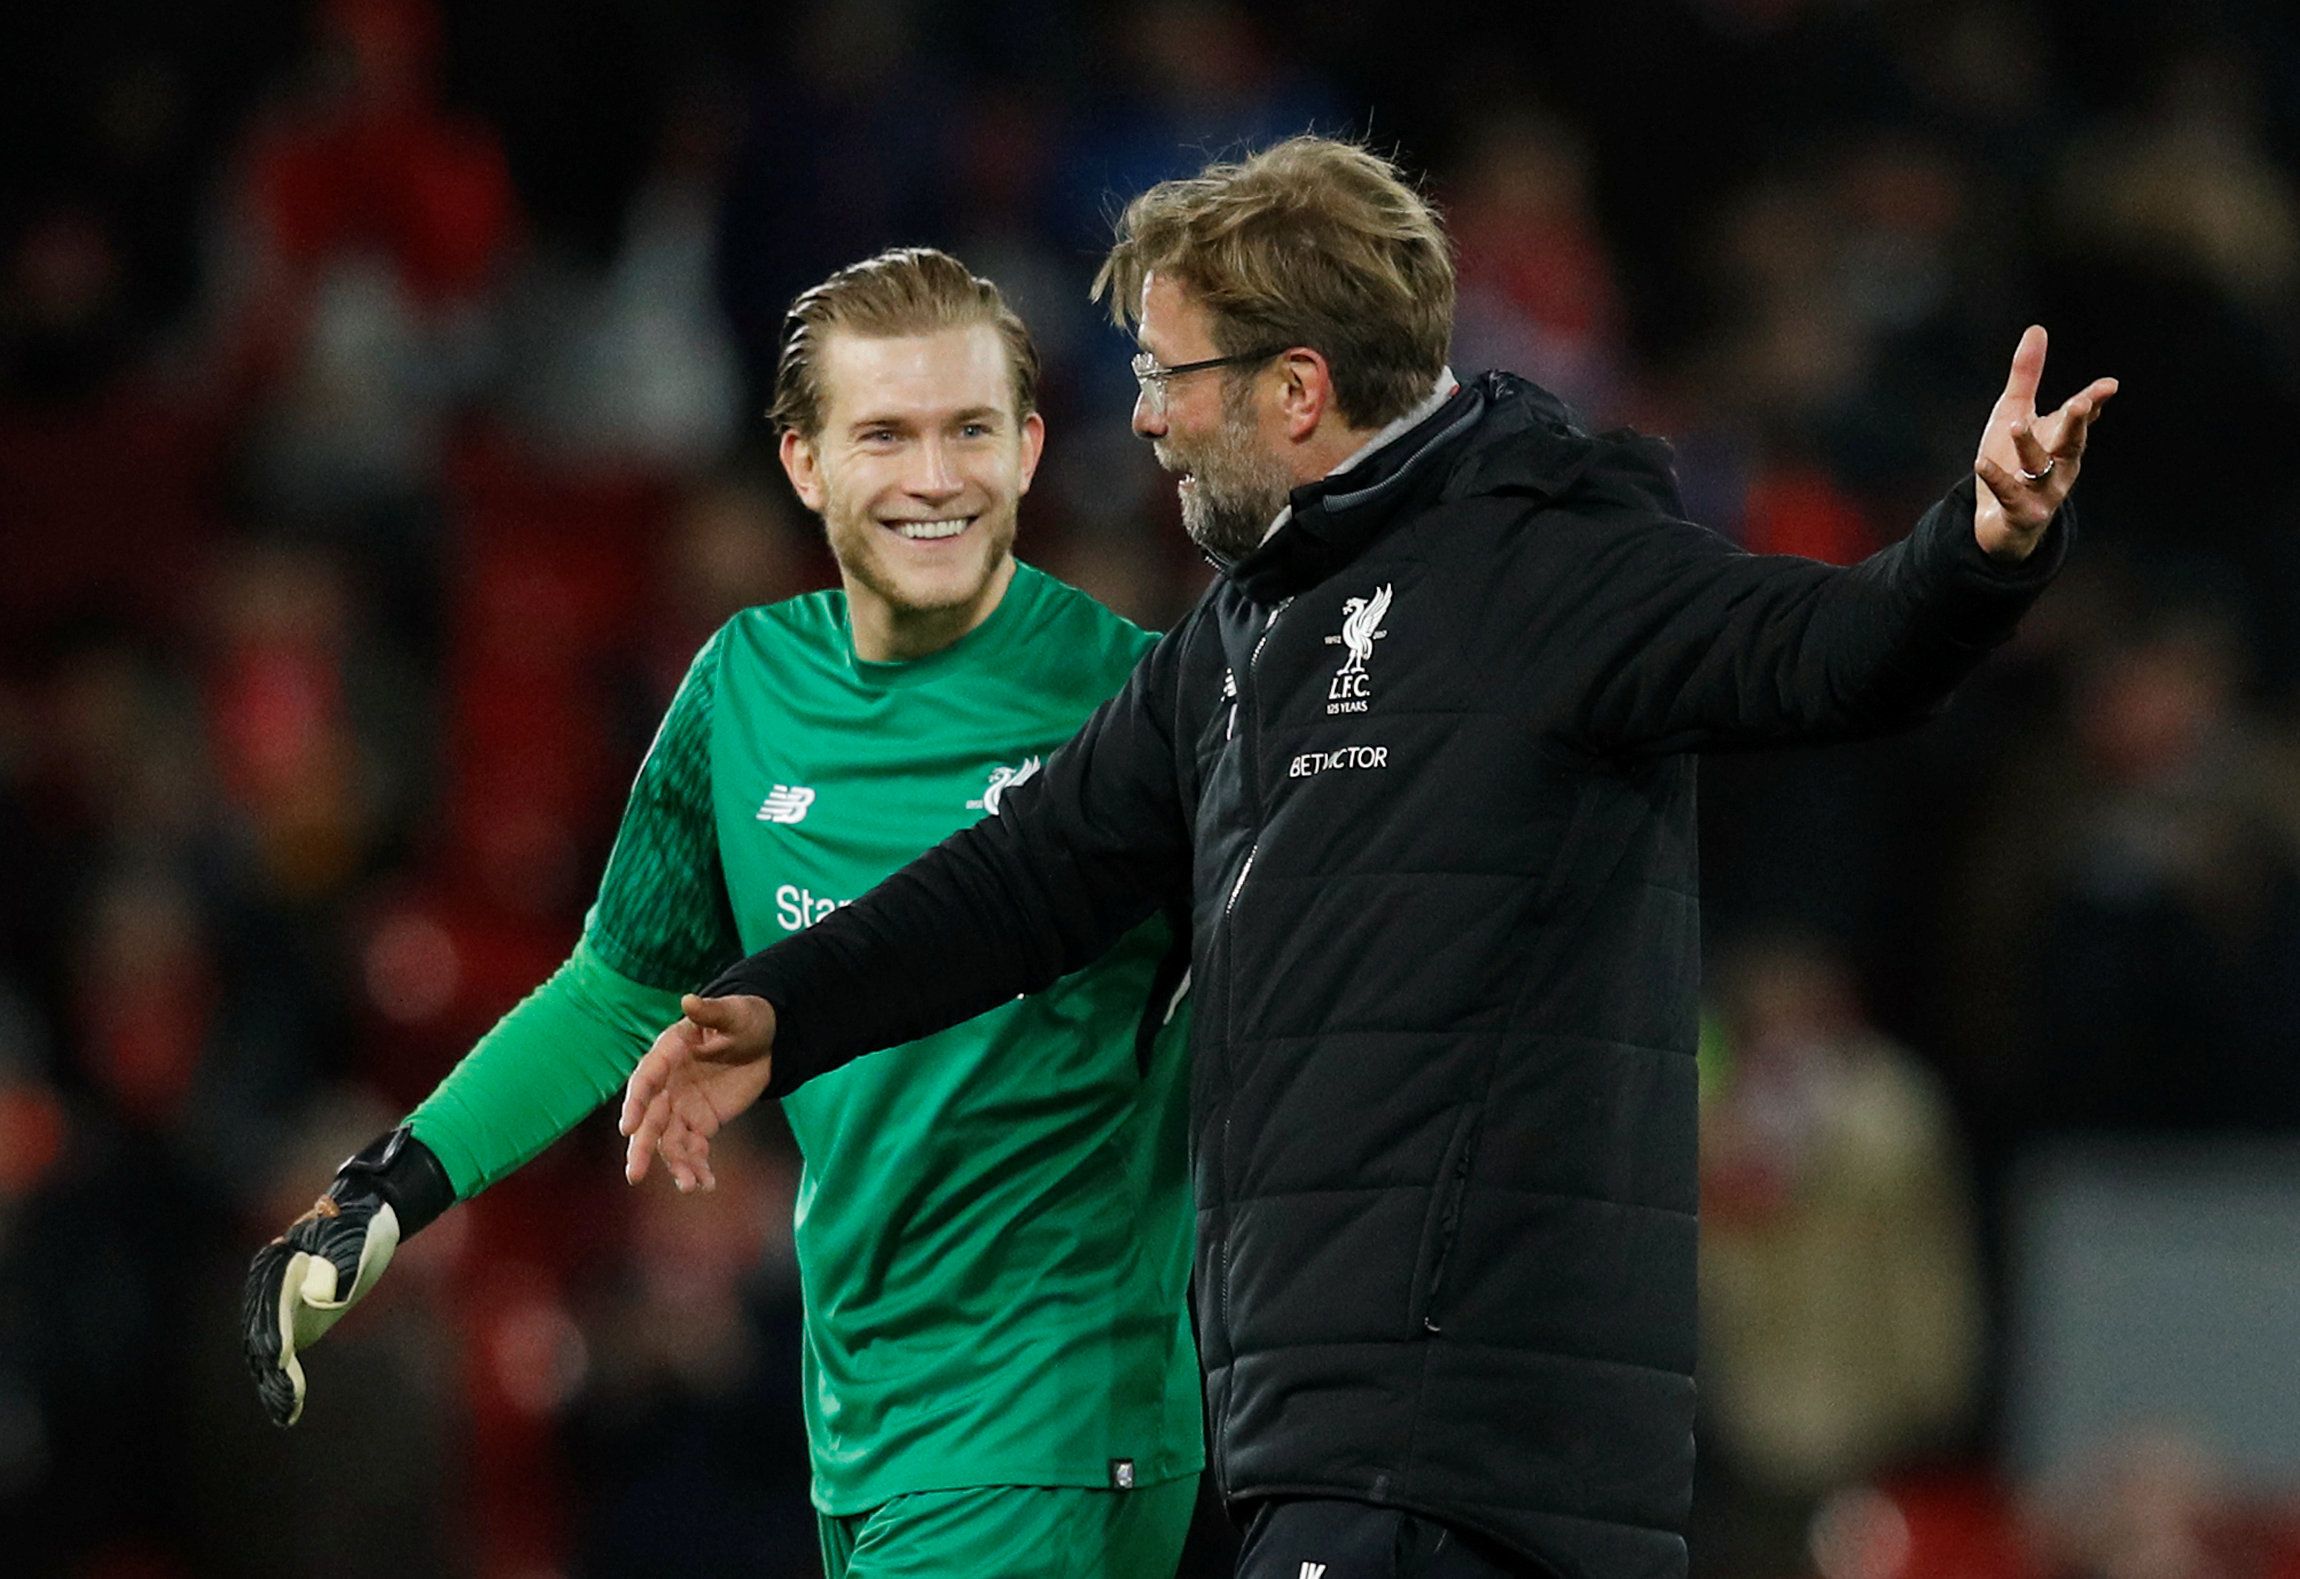 Soccer Football - Premier League - Liverpool vs Leicester City - Anfield, Liverpool, Britain - December 30, 2017   Liverpool manager Juergen Klopp celebrates with Loris Karius after the match     REUTERS/Phil Noble    EDITORIAL USE ONLY. No use with unauthorized audio, video, data, fixture lists, club/league logos or "live" services. Online in-match use limited to 75 images, no video emulation. No use in betting, games or single club/league/player publications.  Please contact your account repre